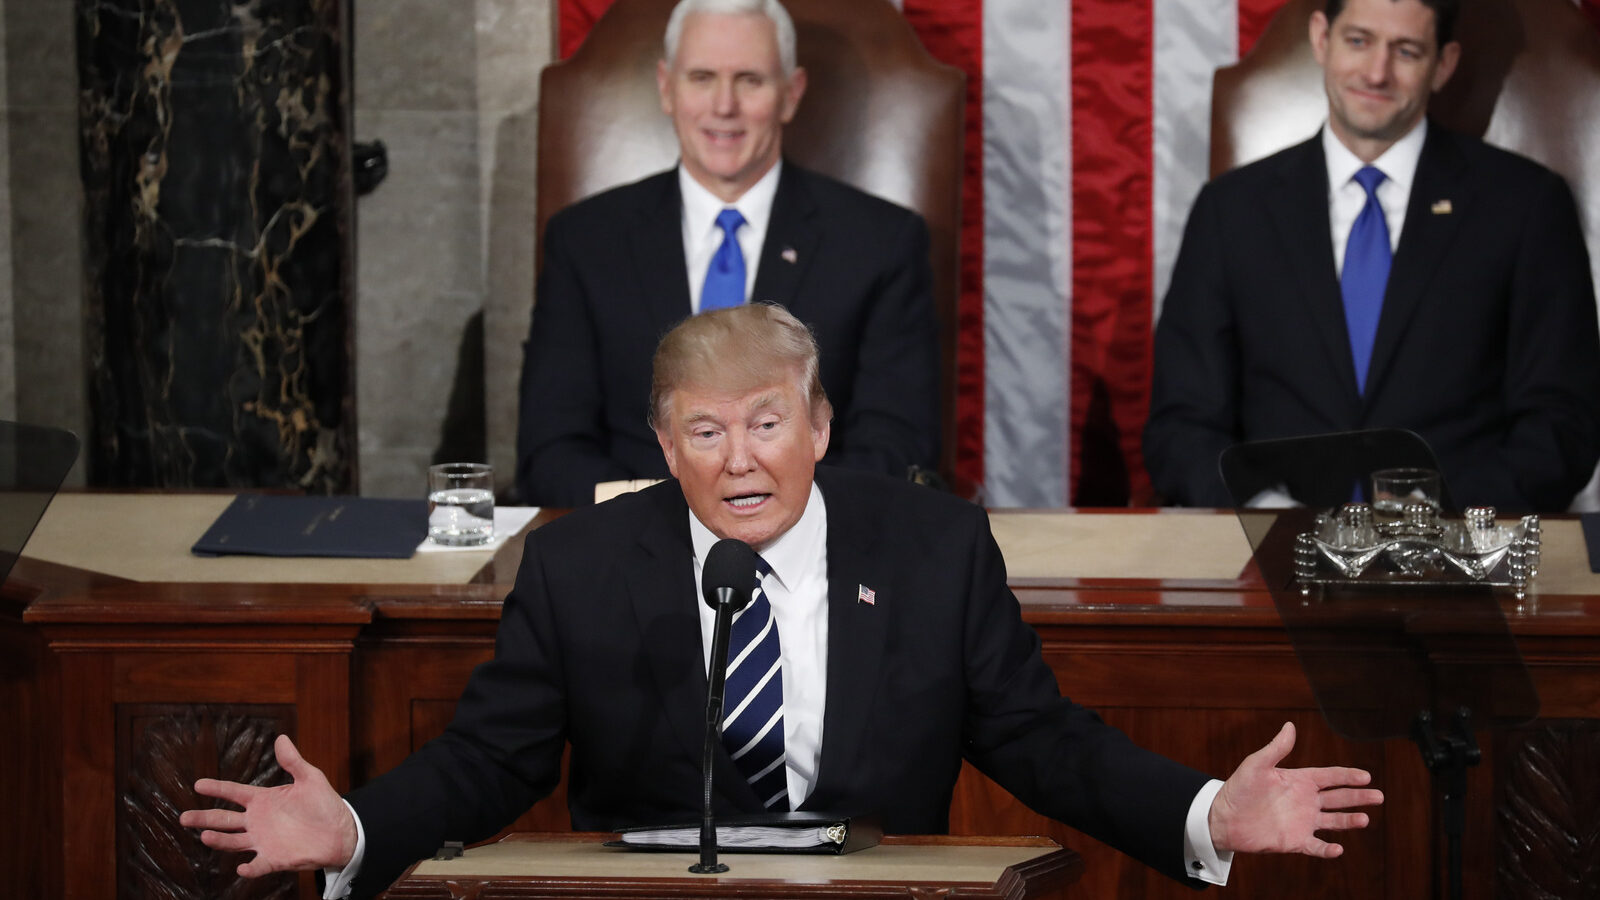 President Donald Trump addresses a joint session of Congress on Capitol Hill in Washington, Tuesday, Feb. 28, 2017, as Vice President Mike Pence and House Speaker Paul Ryan of Wis. listen. (AP Photo/Pablo Martinez Monsivais)